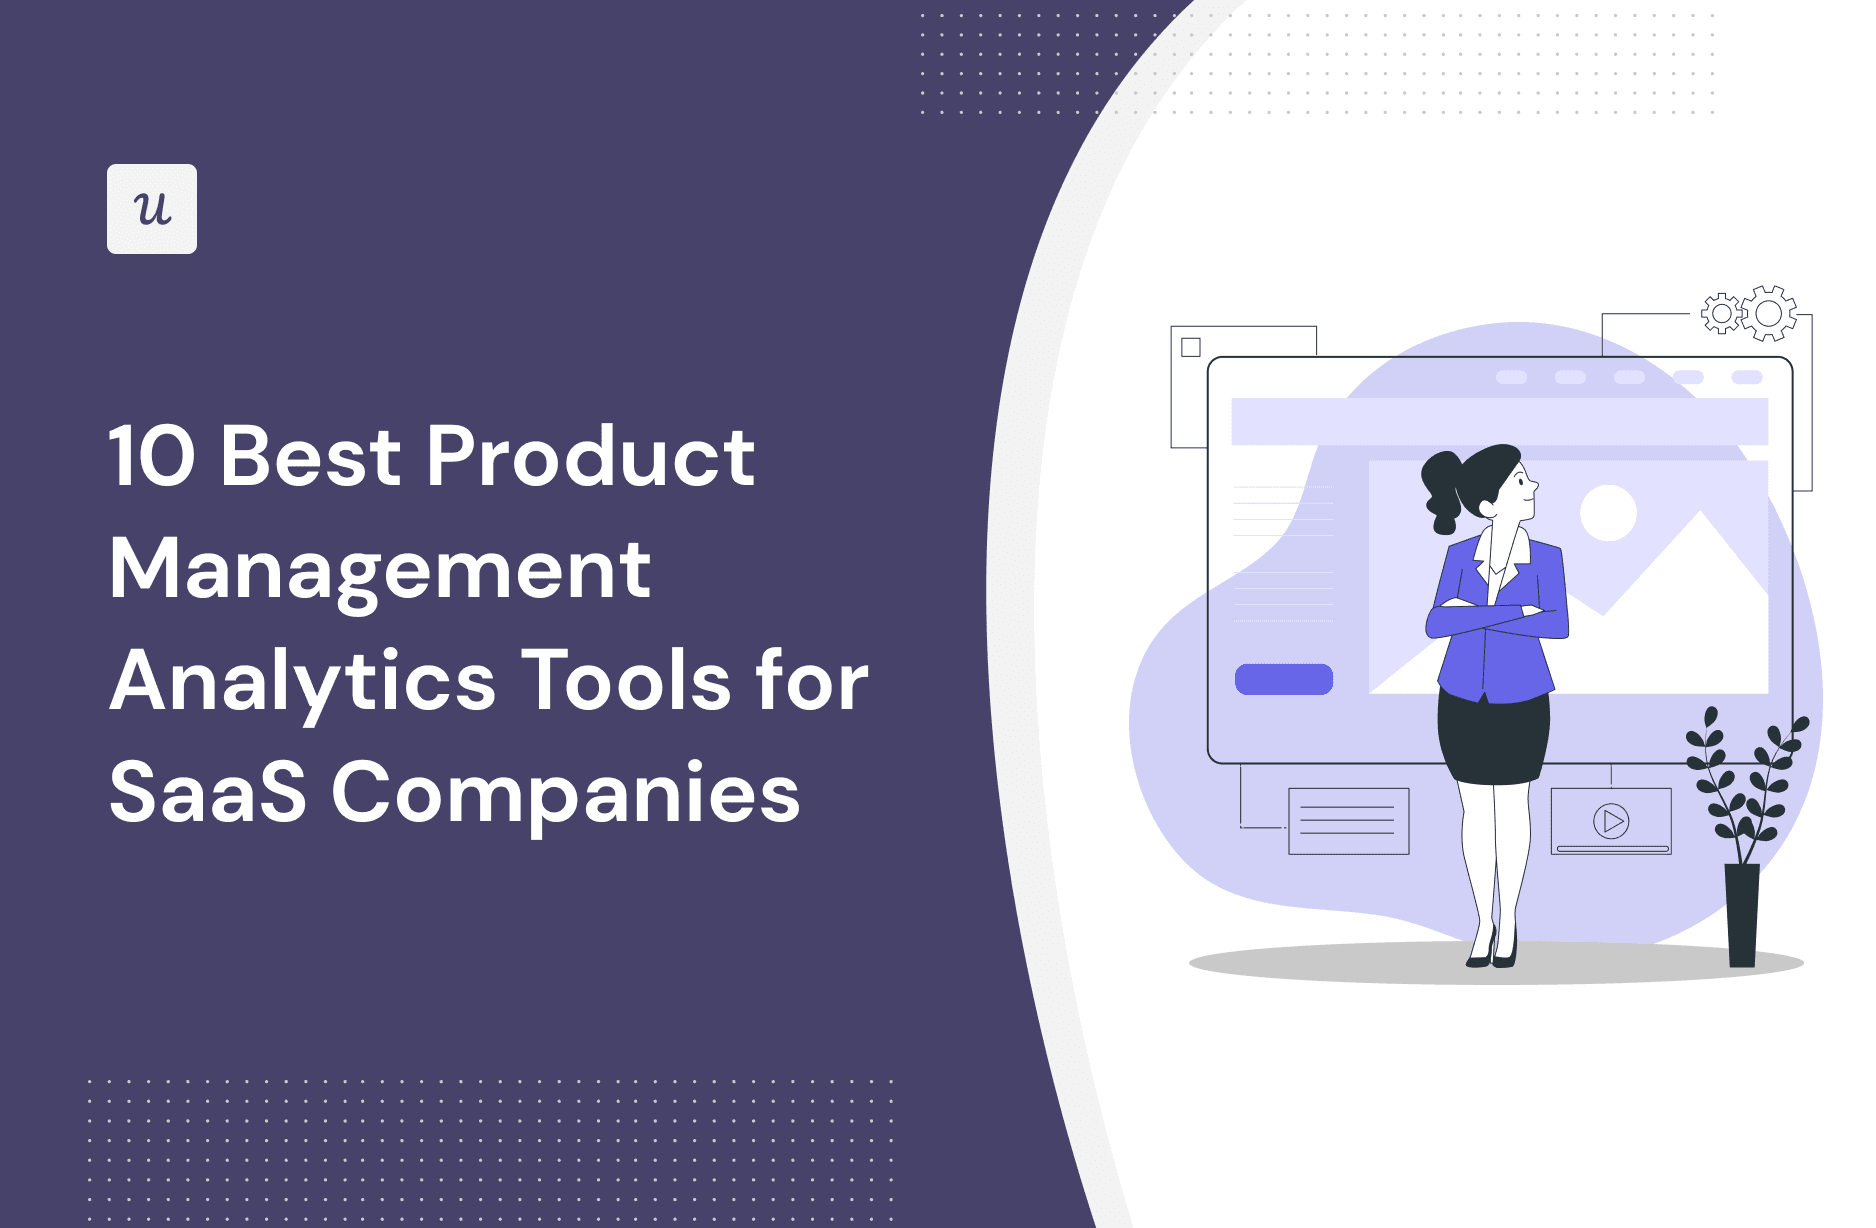 10 Best Product Management Analytics Tools for SaaS Companies cover